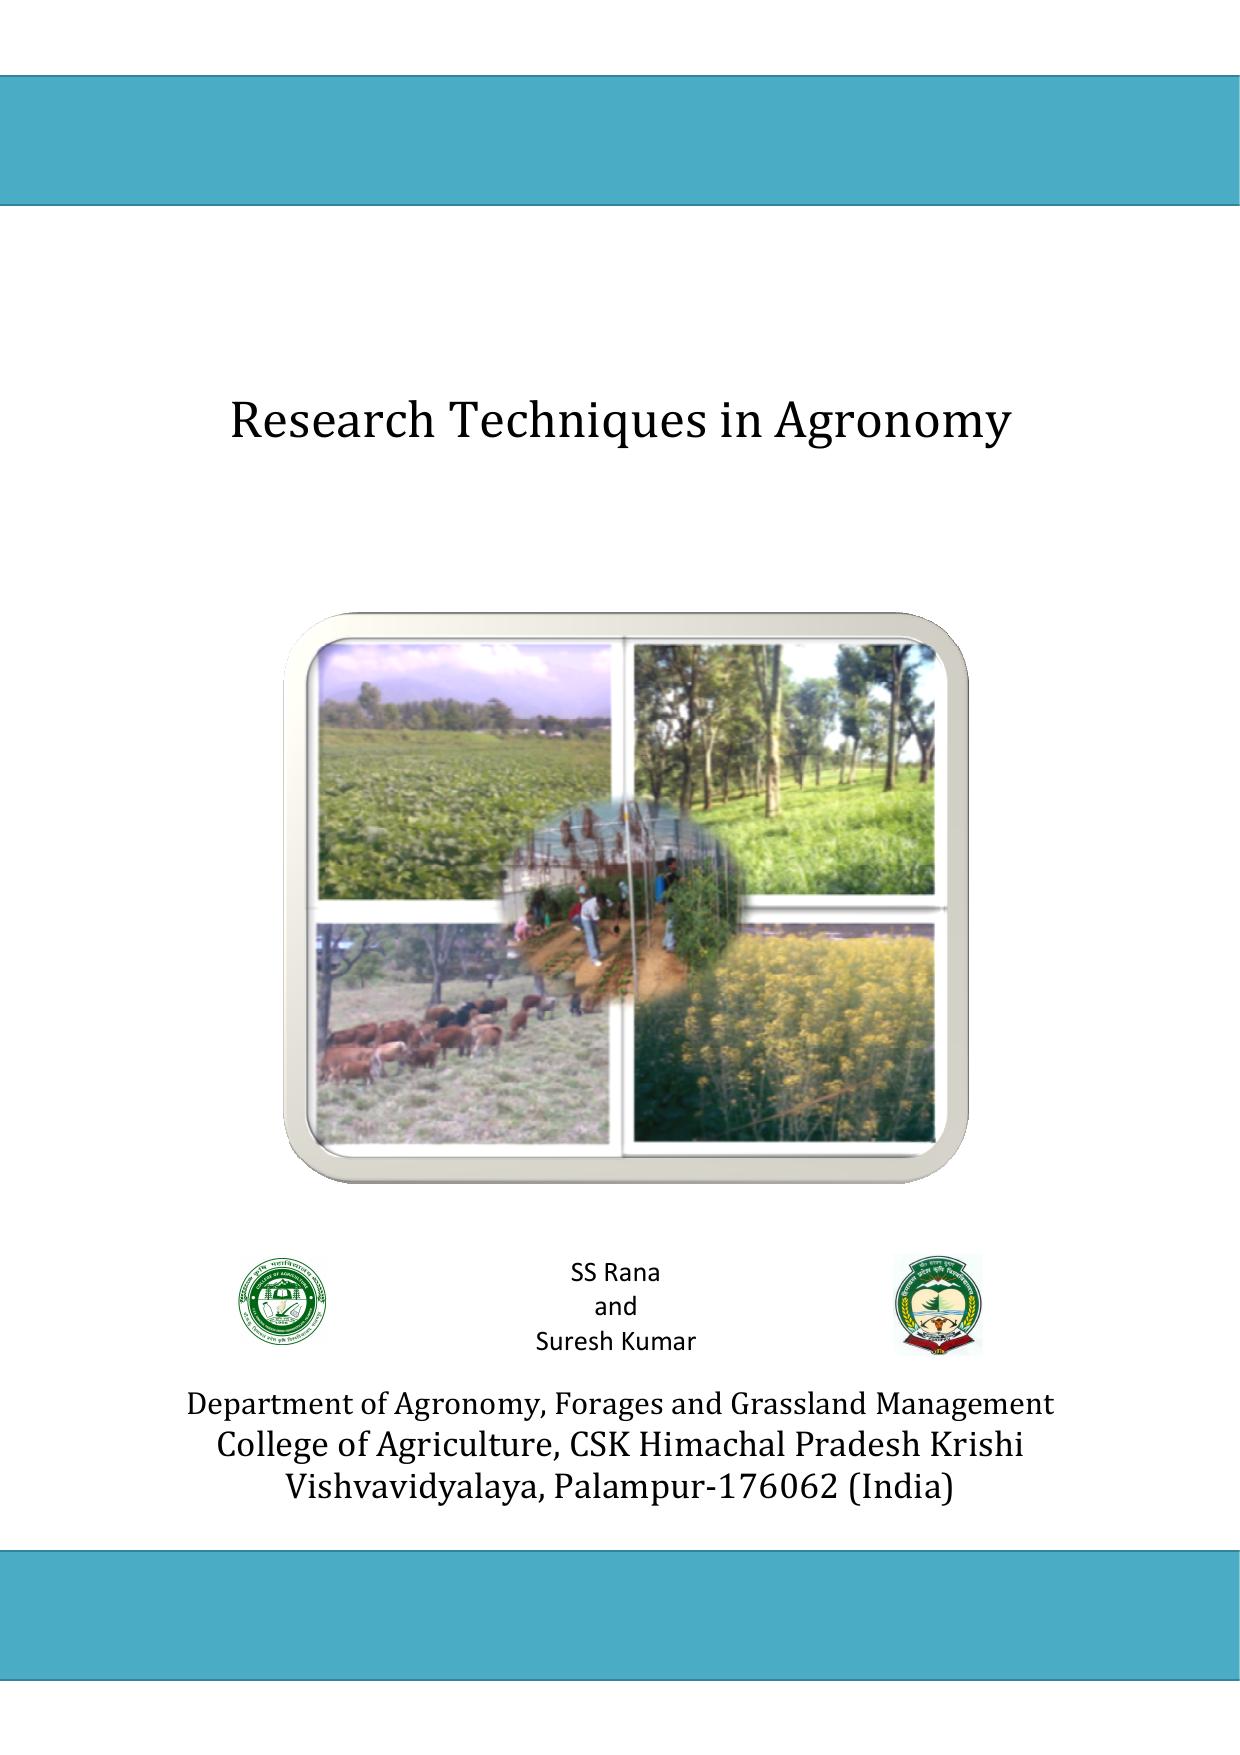 Research-Techniques-in-Agronomy-2014